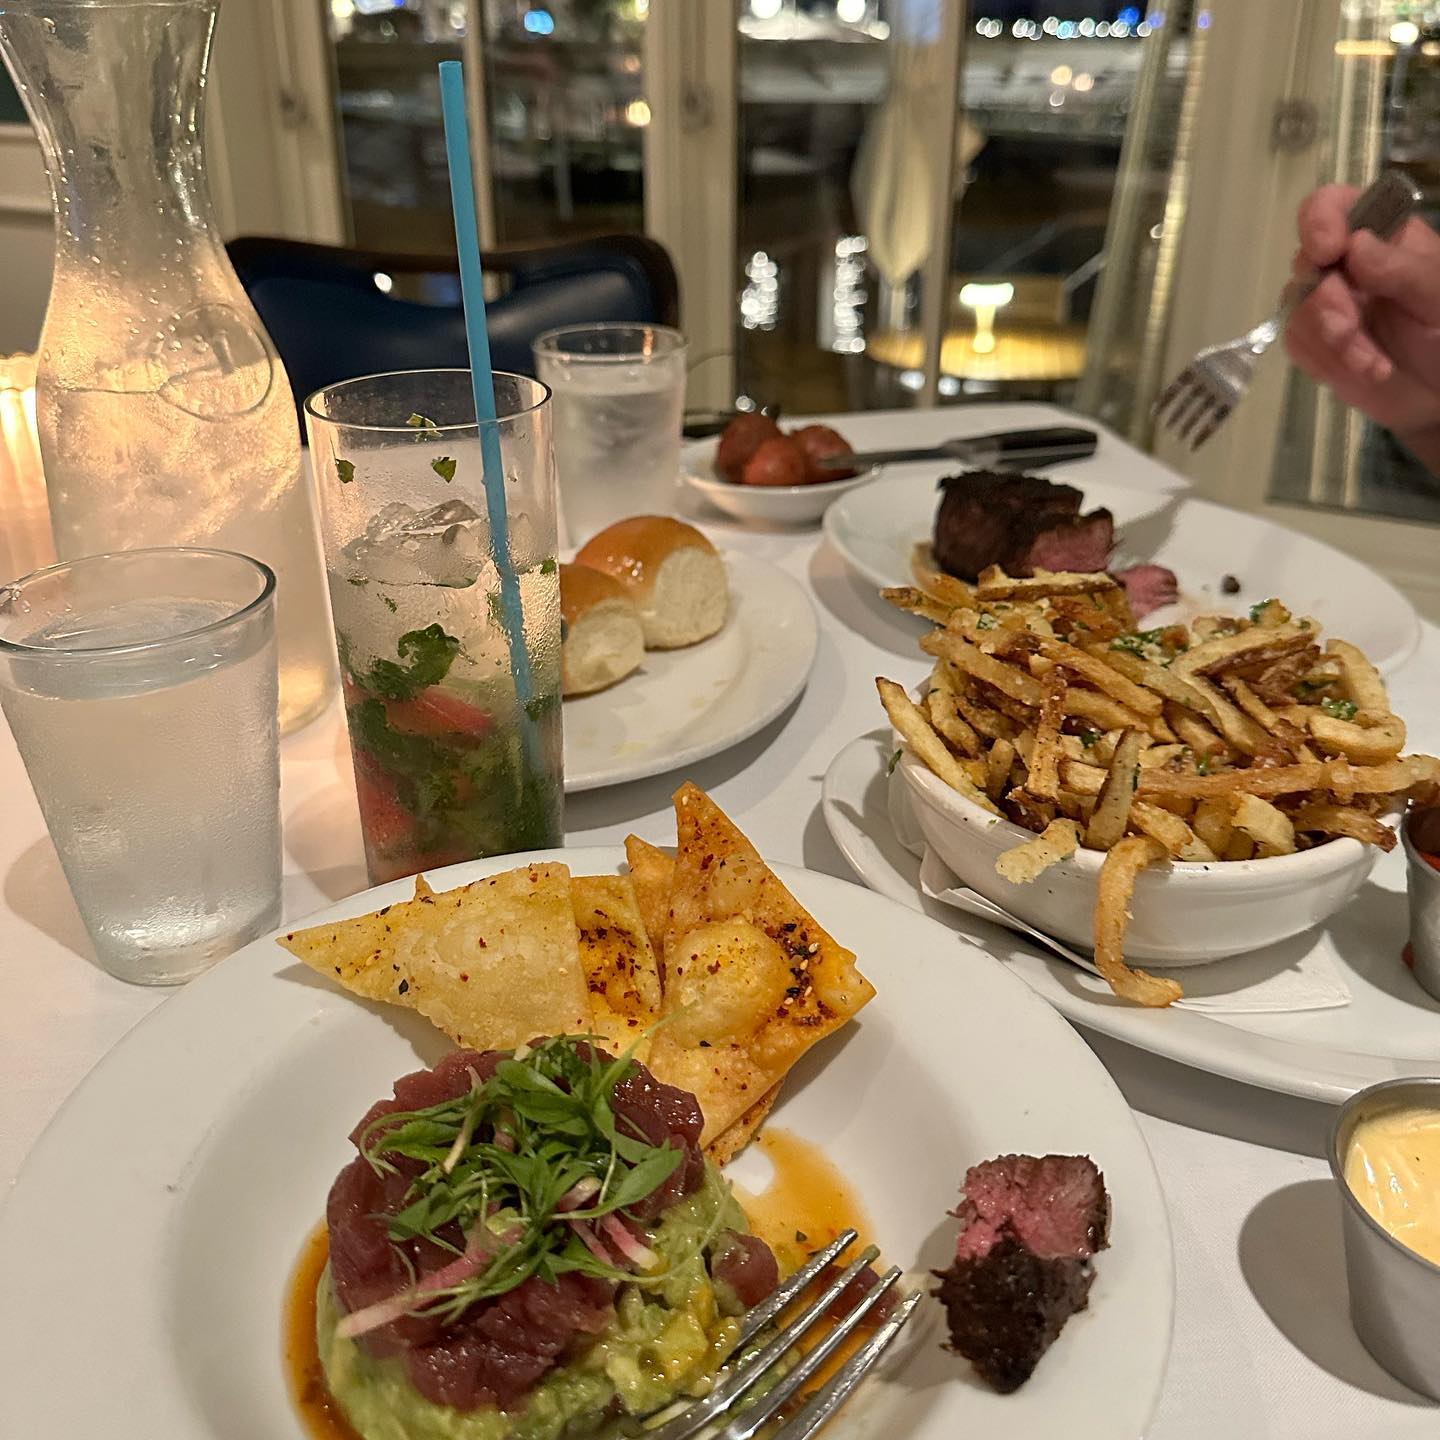 Food at The Boathouse at Disney Springs